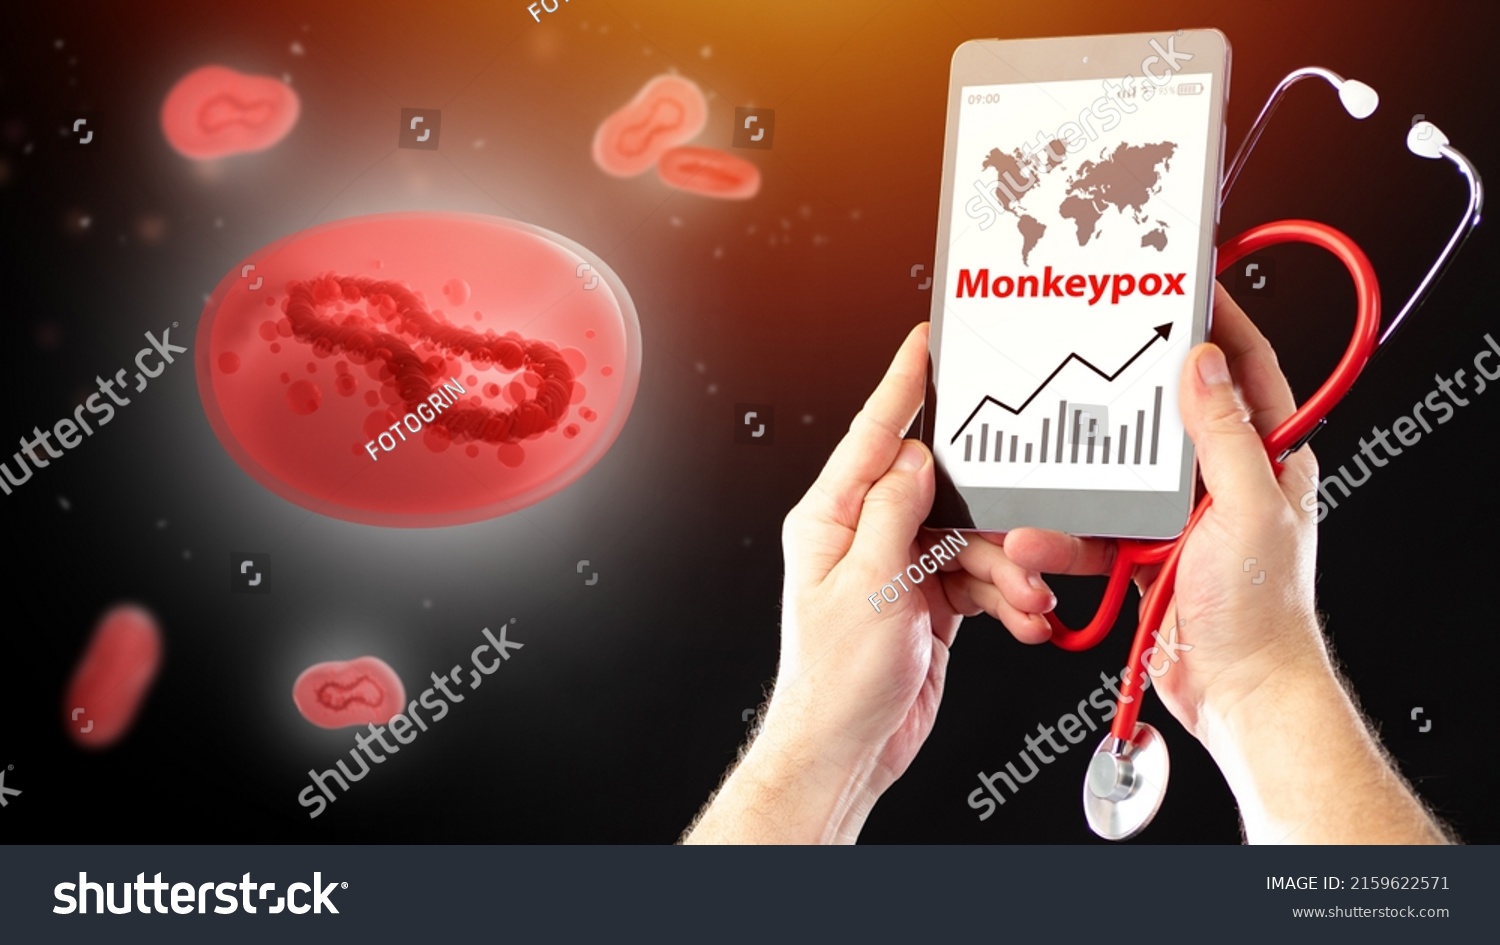 Monkeypox virus strain. Graph growth monkeypox infections in phone. Doctor hands with stethoscope on dark. Molecule is infected with fever. Monkeypox epidemic. Infectious virus outbreak.  #2159622571